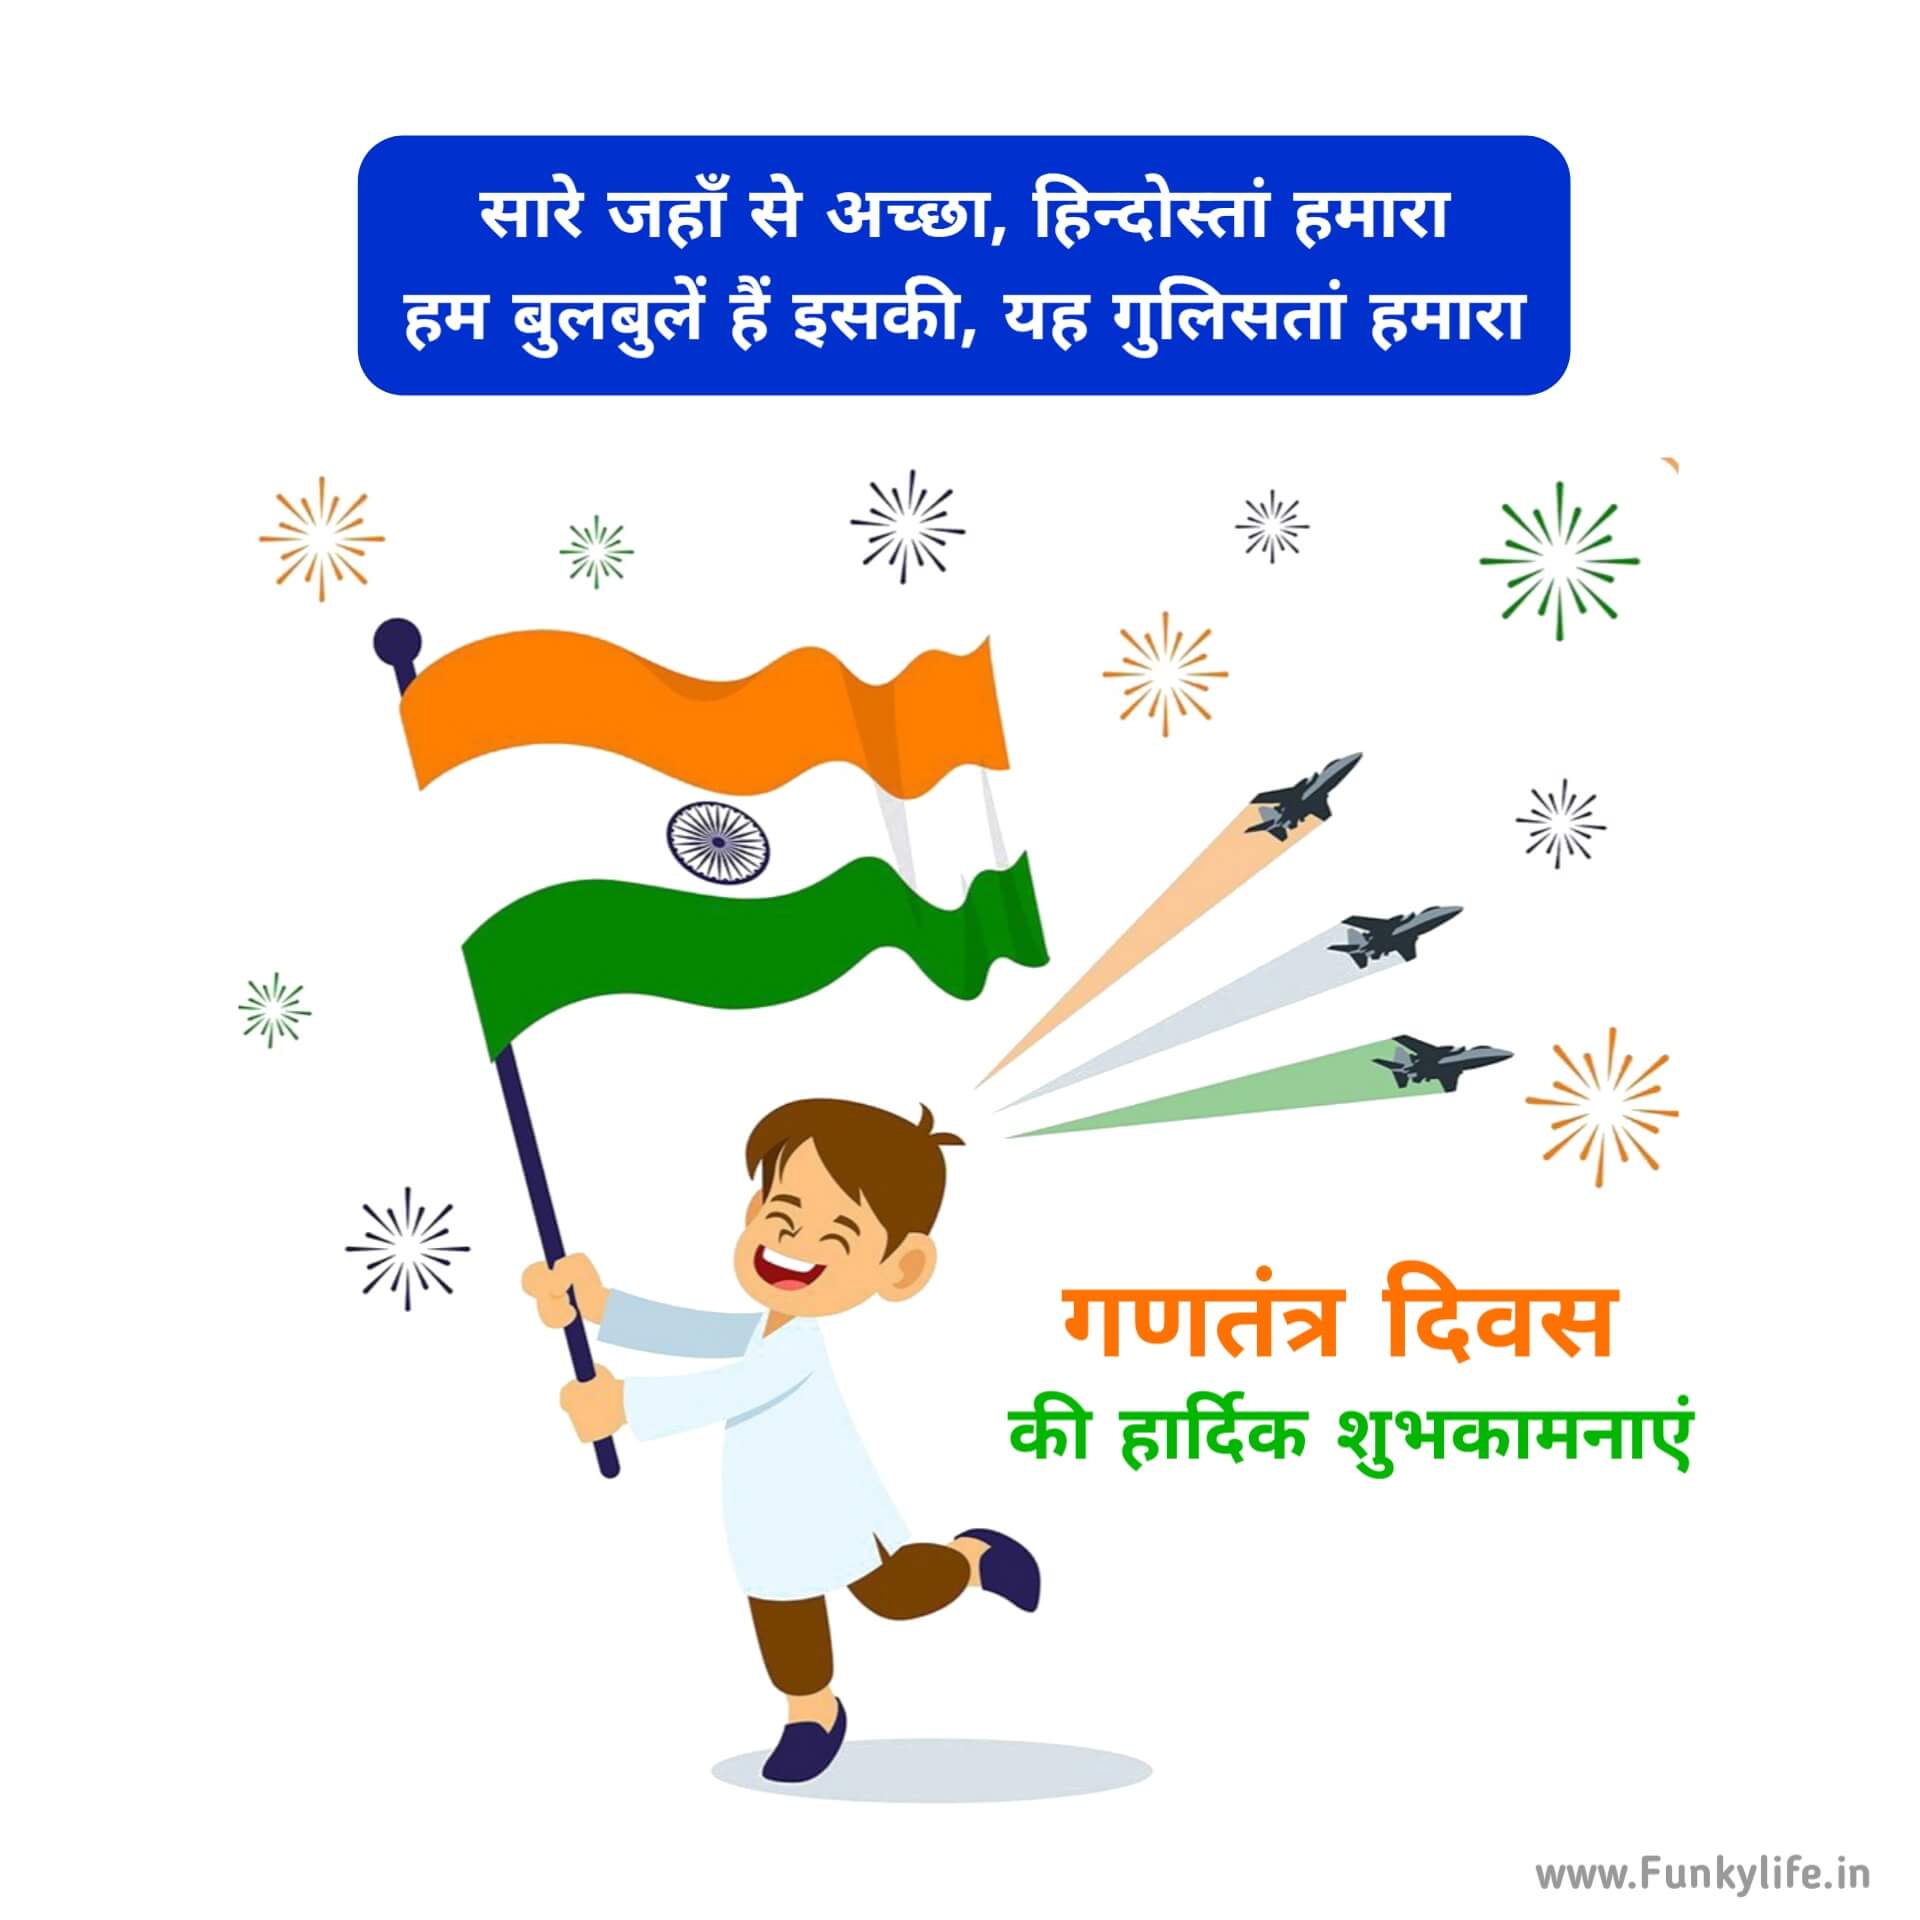 Republic Day Wishes in Hindi for WhatsApp